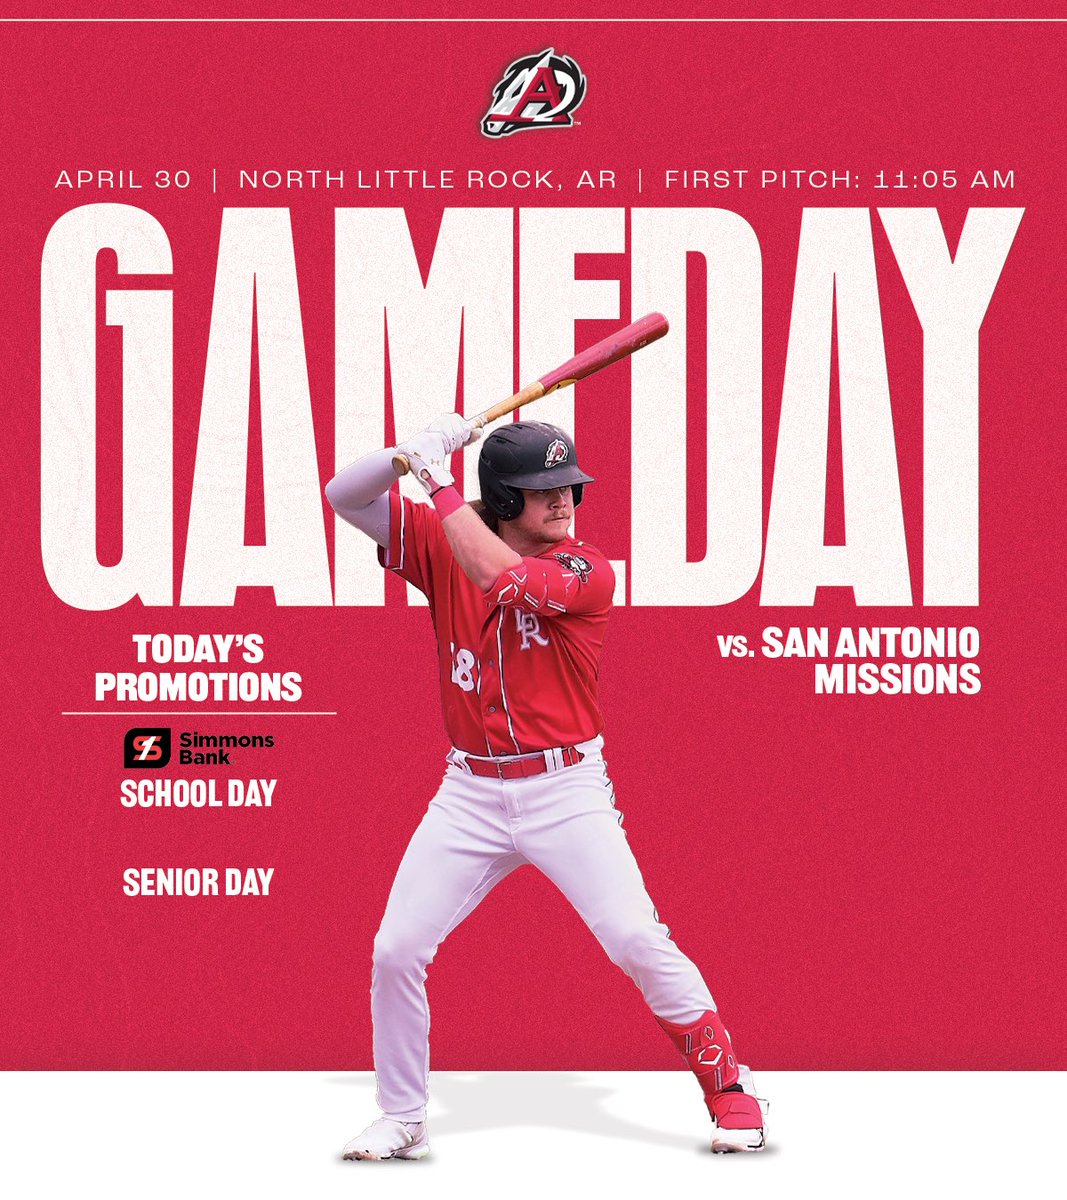 Morning baseball, who says no? ☀️ It’s School Day (@simmons_bank) and Senior Day at Dickey-Stephens Park today! Take a well-deserved field trip and watch your Travelers as they take on the Missions. 🎟️: milb.com/arkansas/ticke…